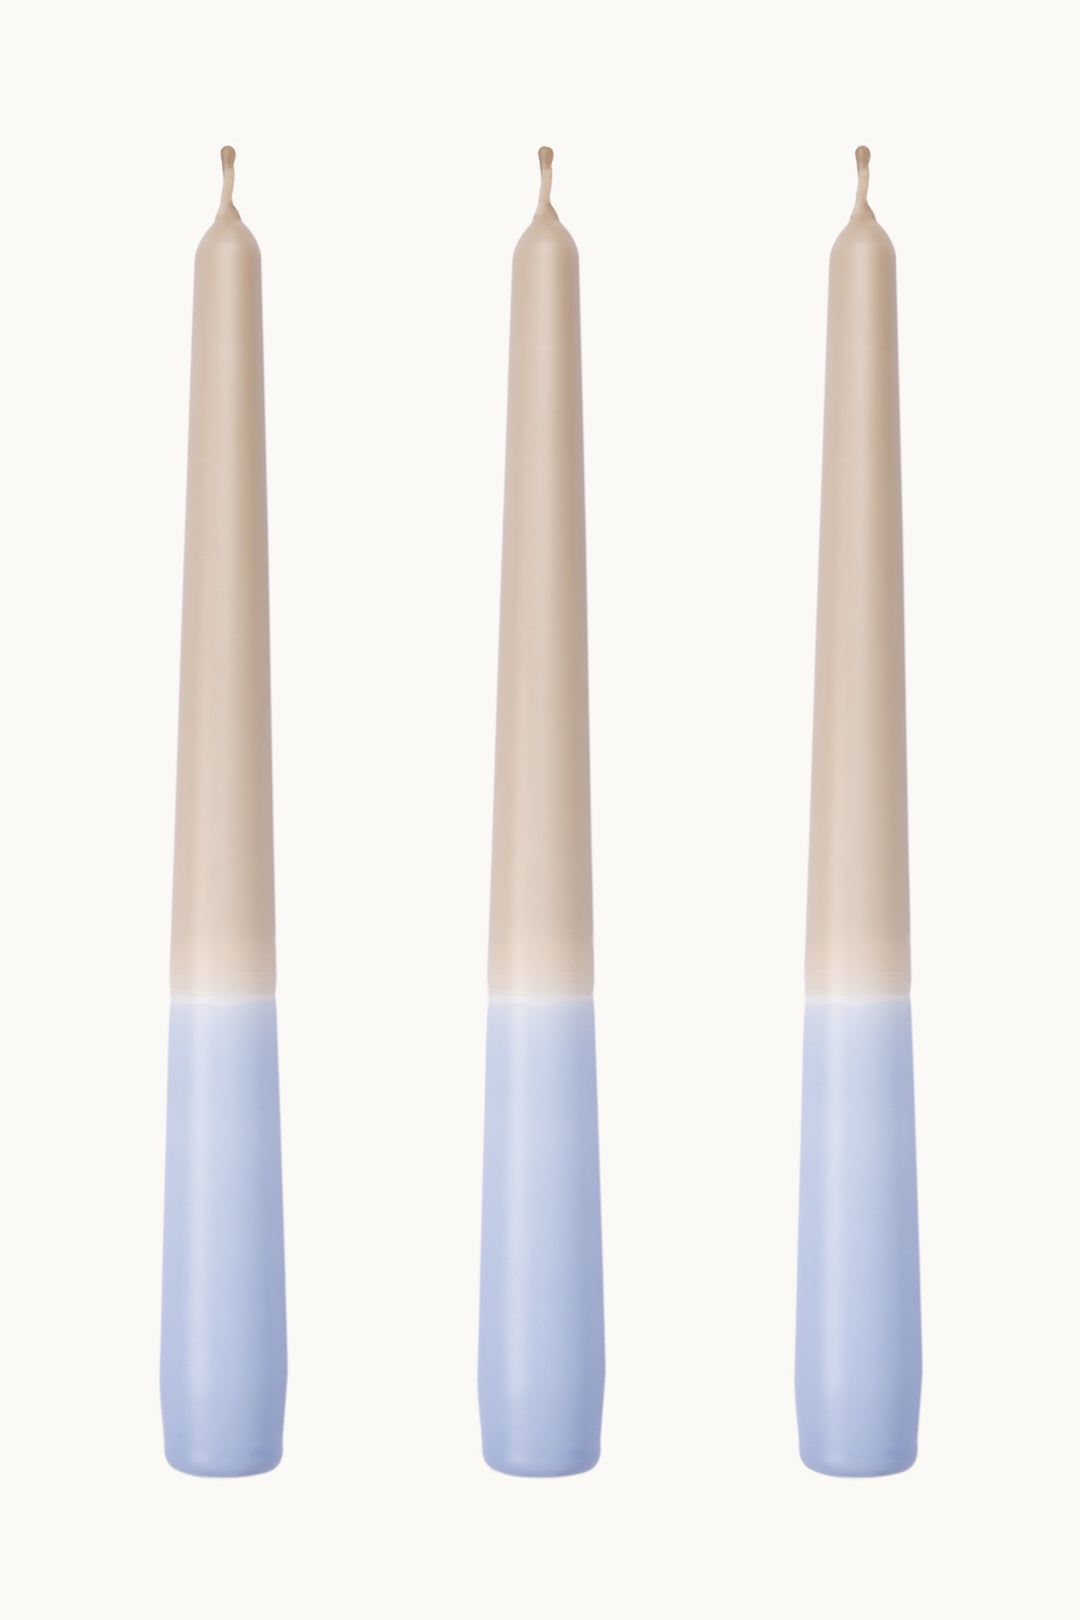 Pastel blue taper candles. Dip dye dinner candles made in the UK. 100% vegan, clean burning wax.